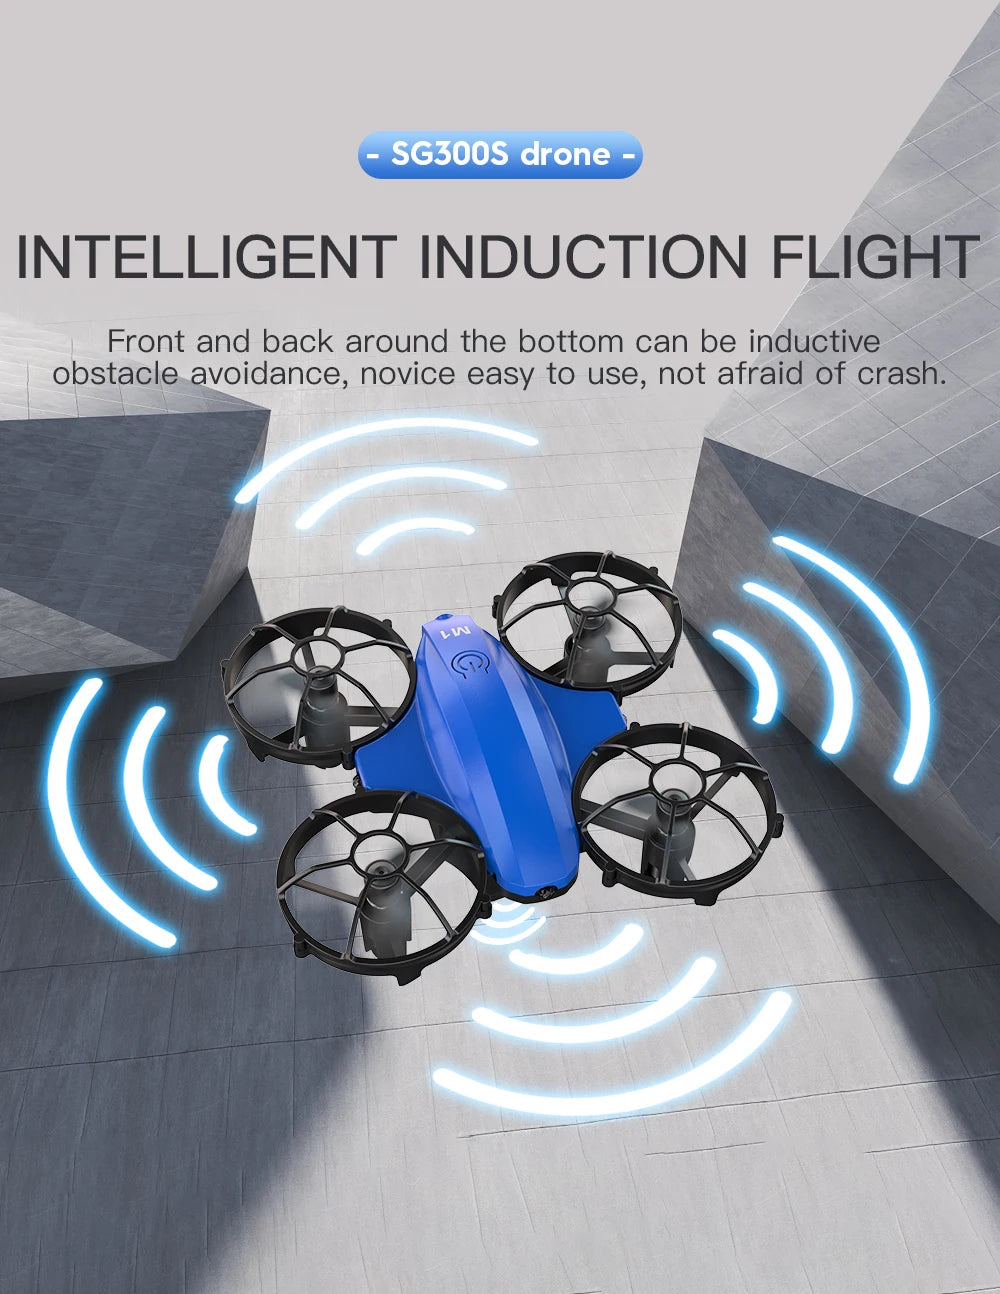 SG300/SG300S Mini Drone, sg3oos drone intelligent induction flight front and